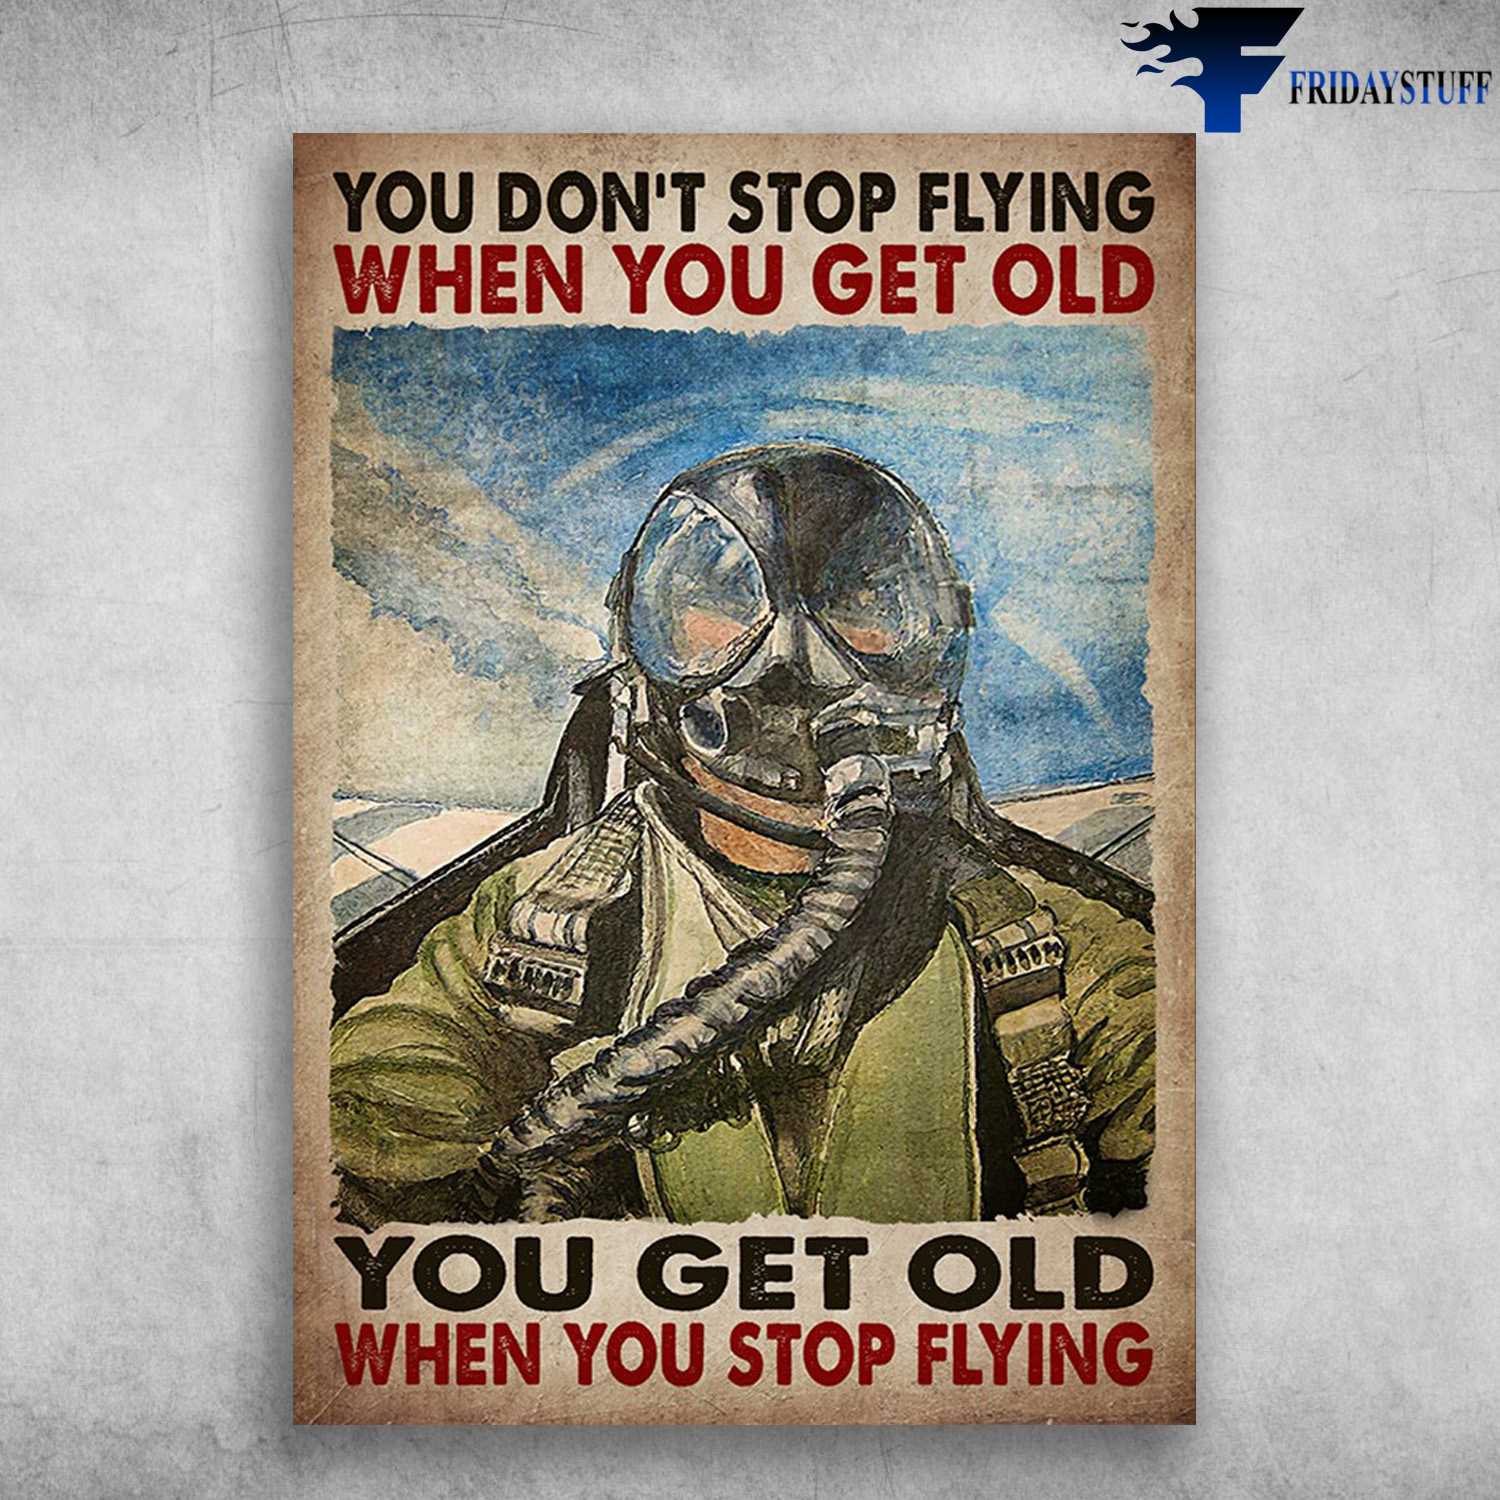 Pilot Aircraft - You Don't Stop FLying When You Get Old, You Get Old When You Stop Flying